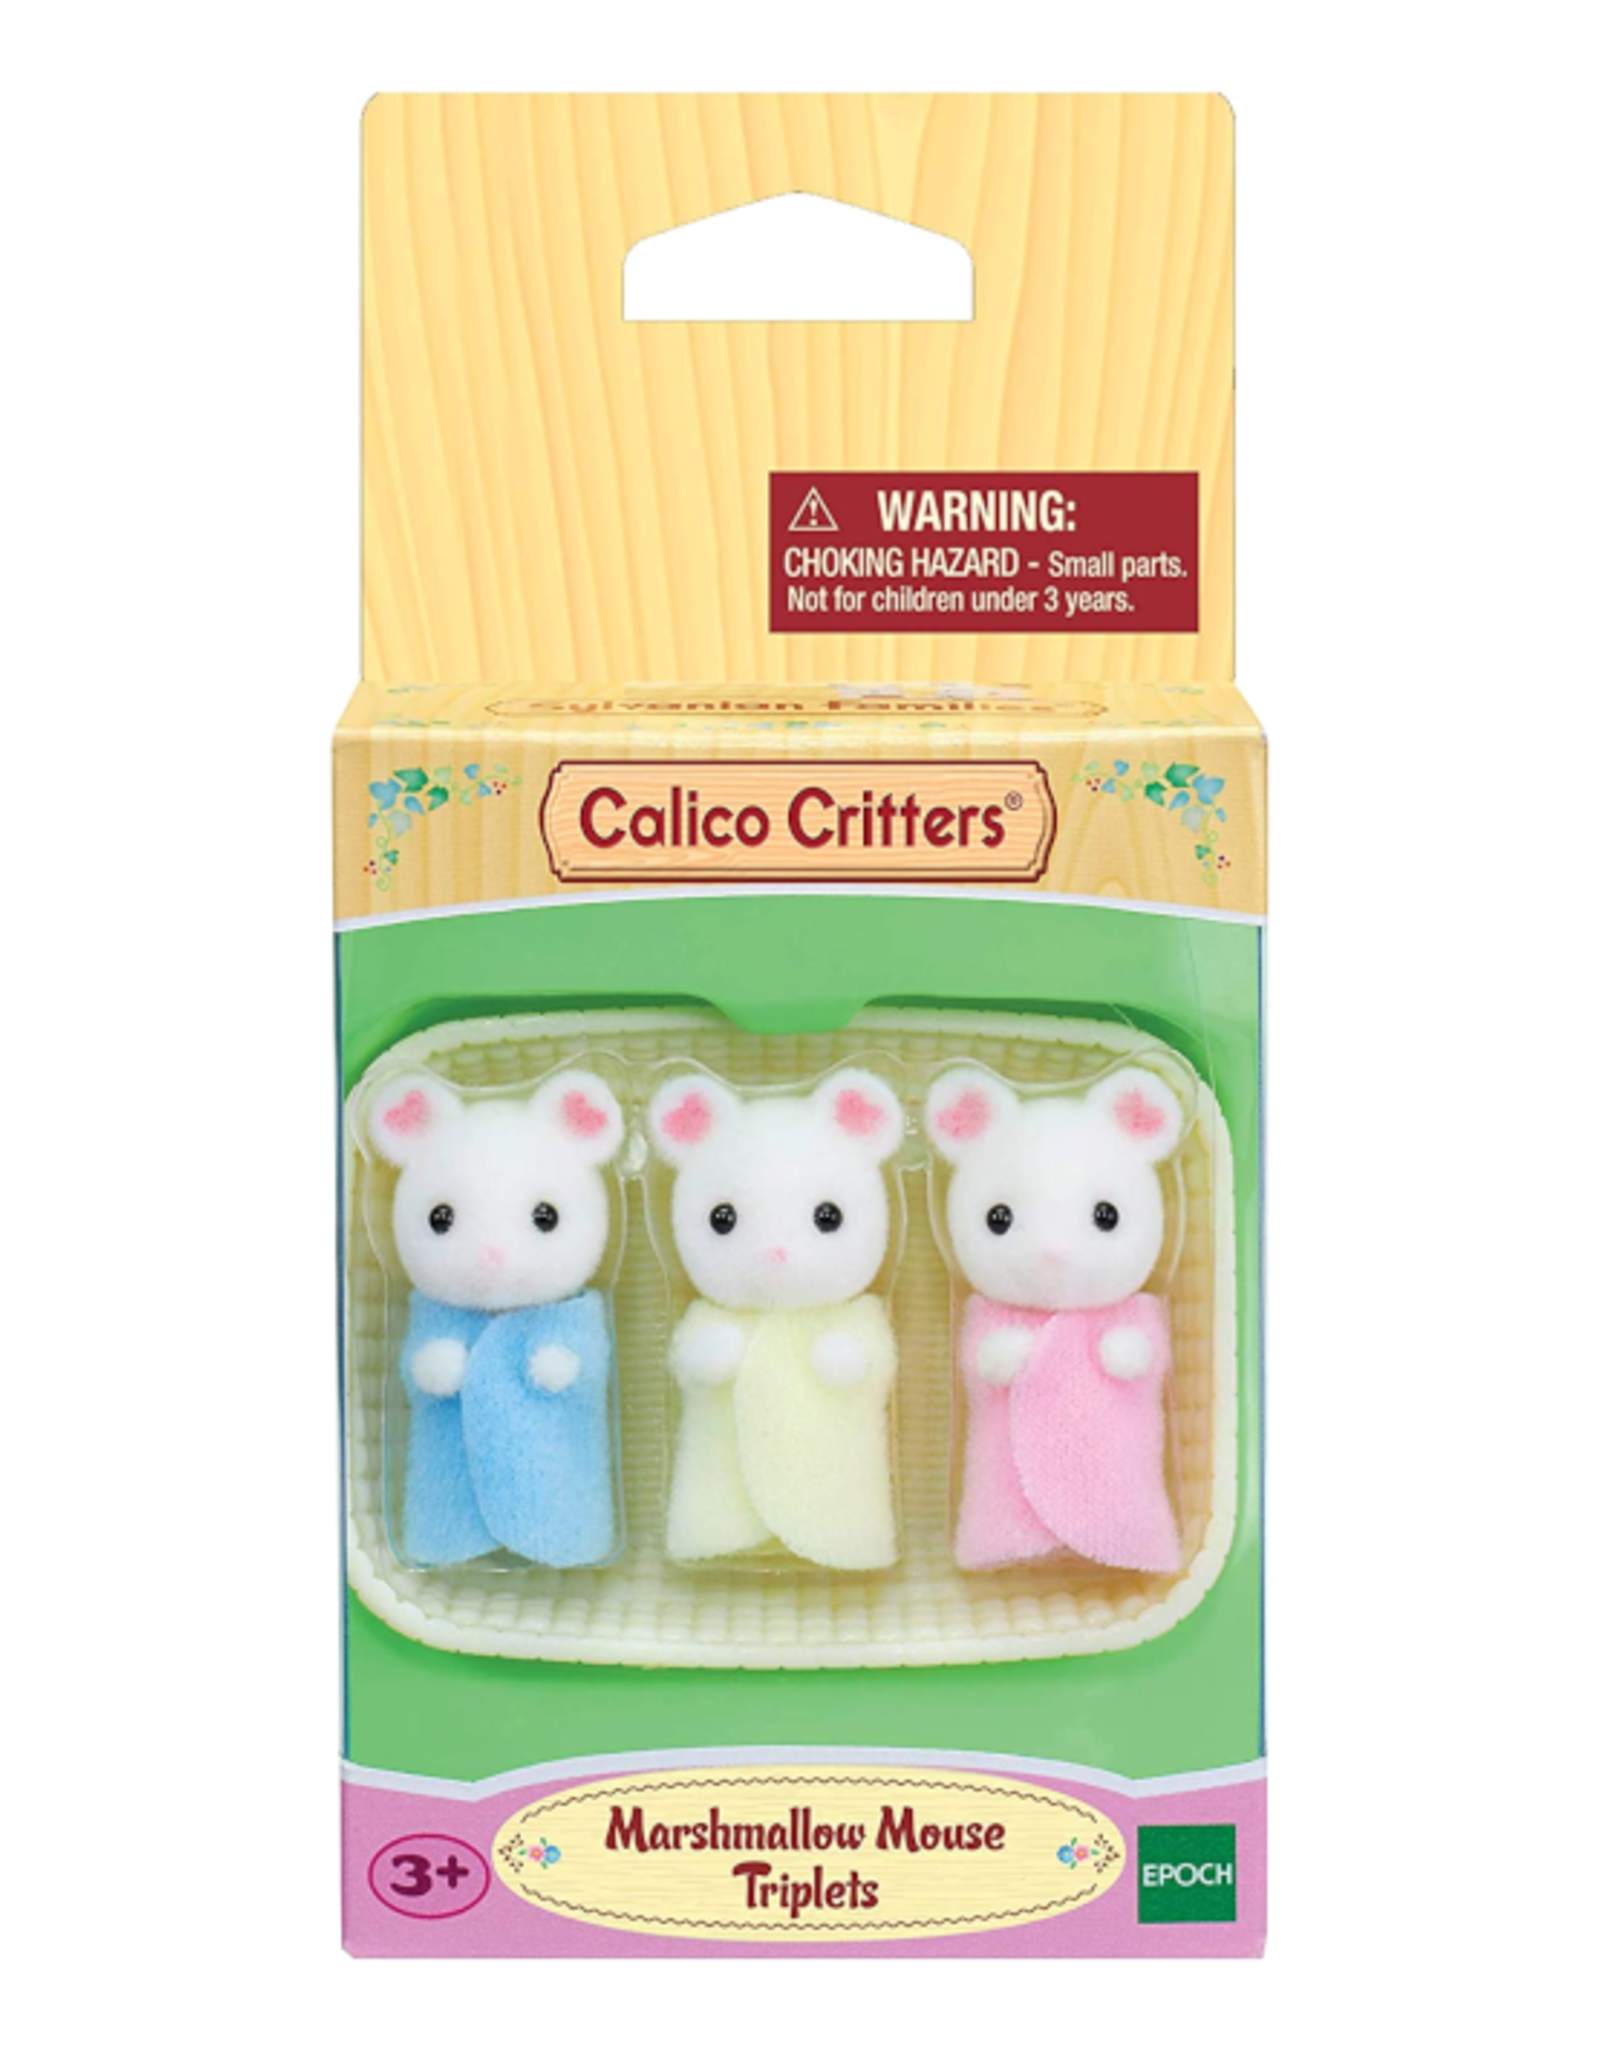 Calico Critters Calico Critters - Marshmallow Mouse Triplets